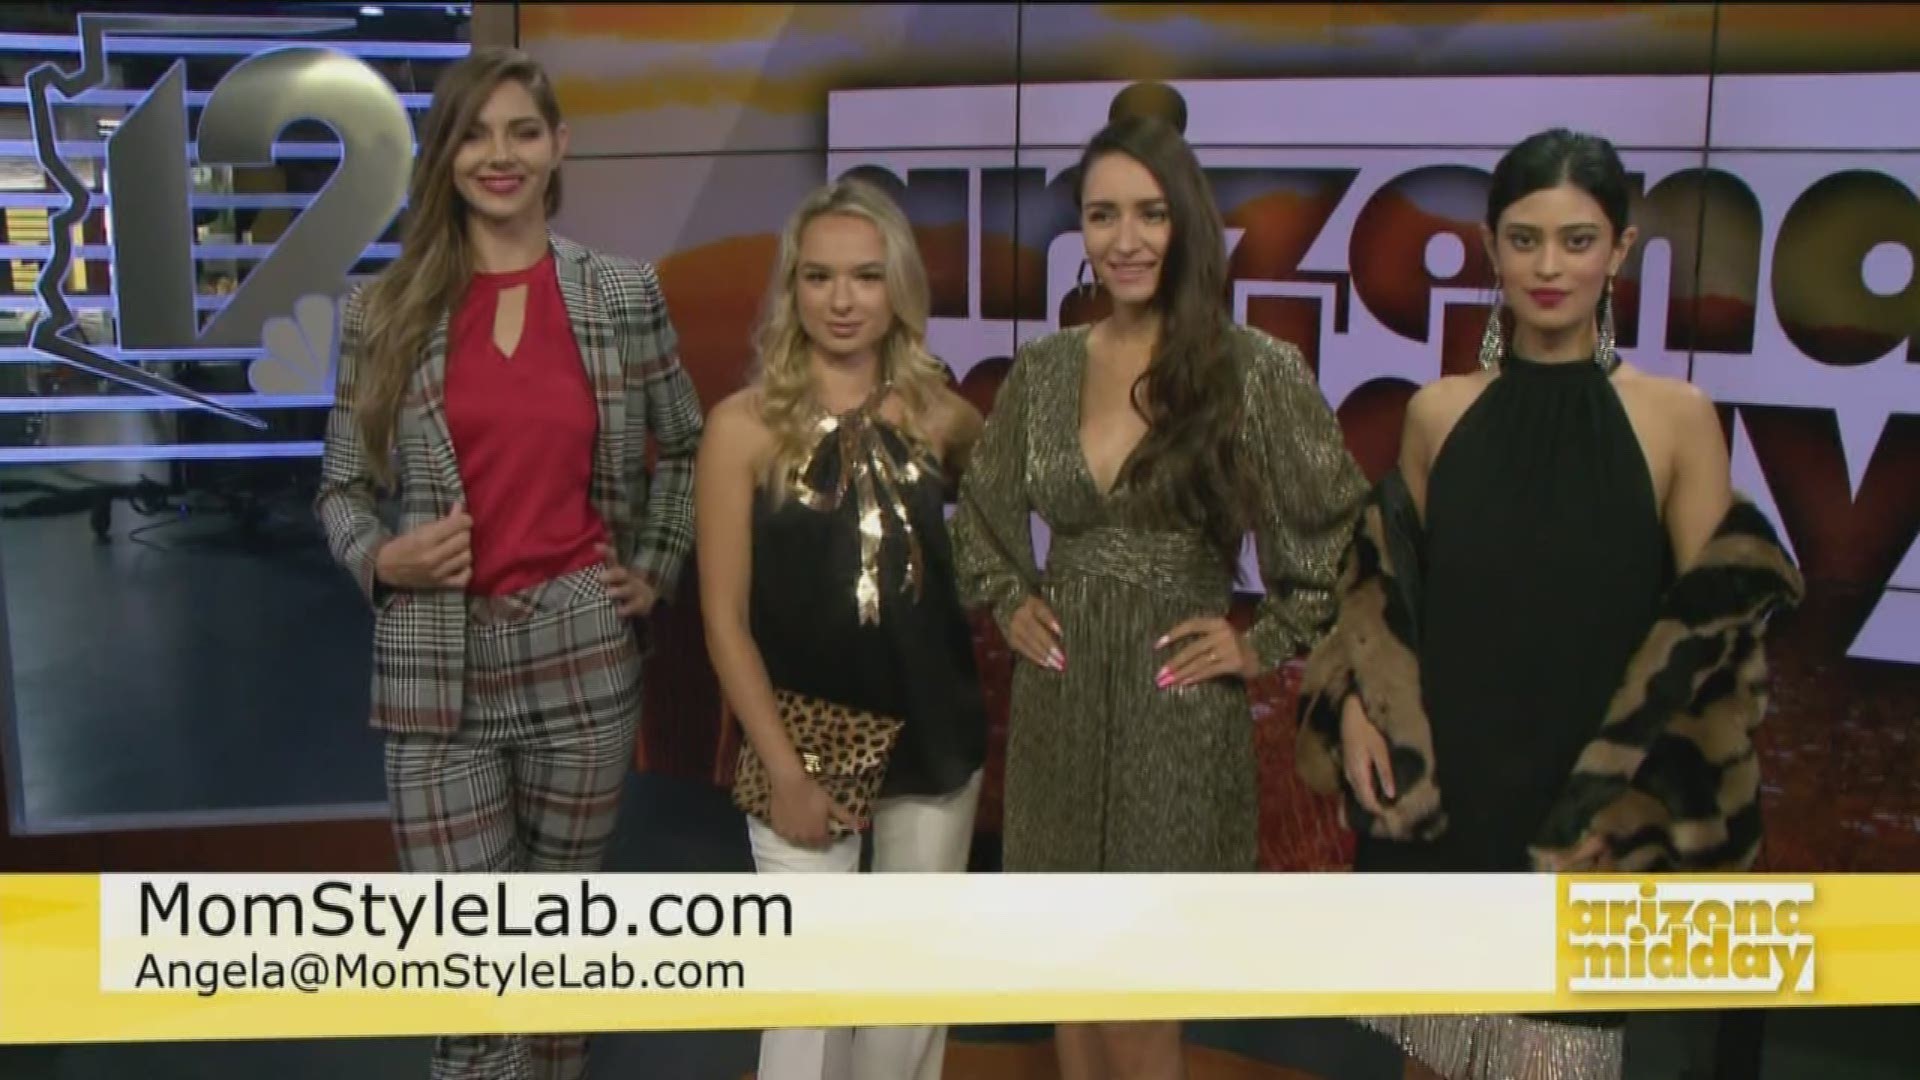 Angela Keller from Mom Style Lab shows us some of her favorite looks and accessories that are perfect for the holiday season and how to get a great discount!